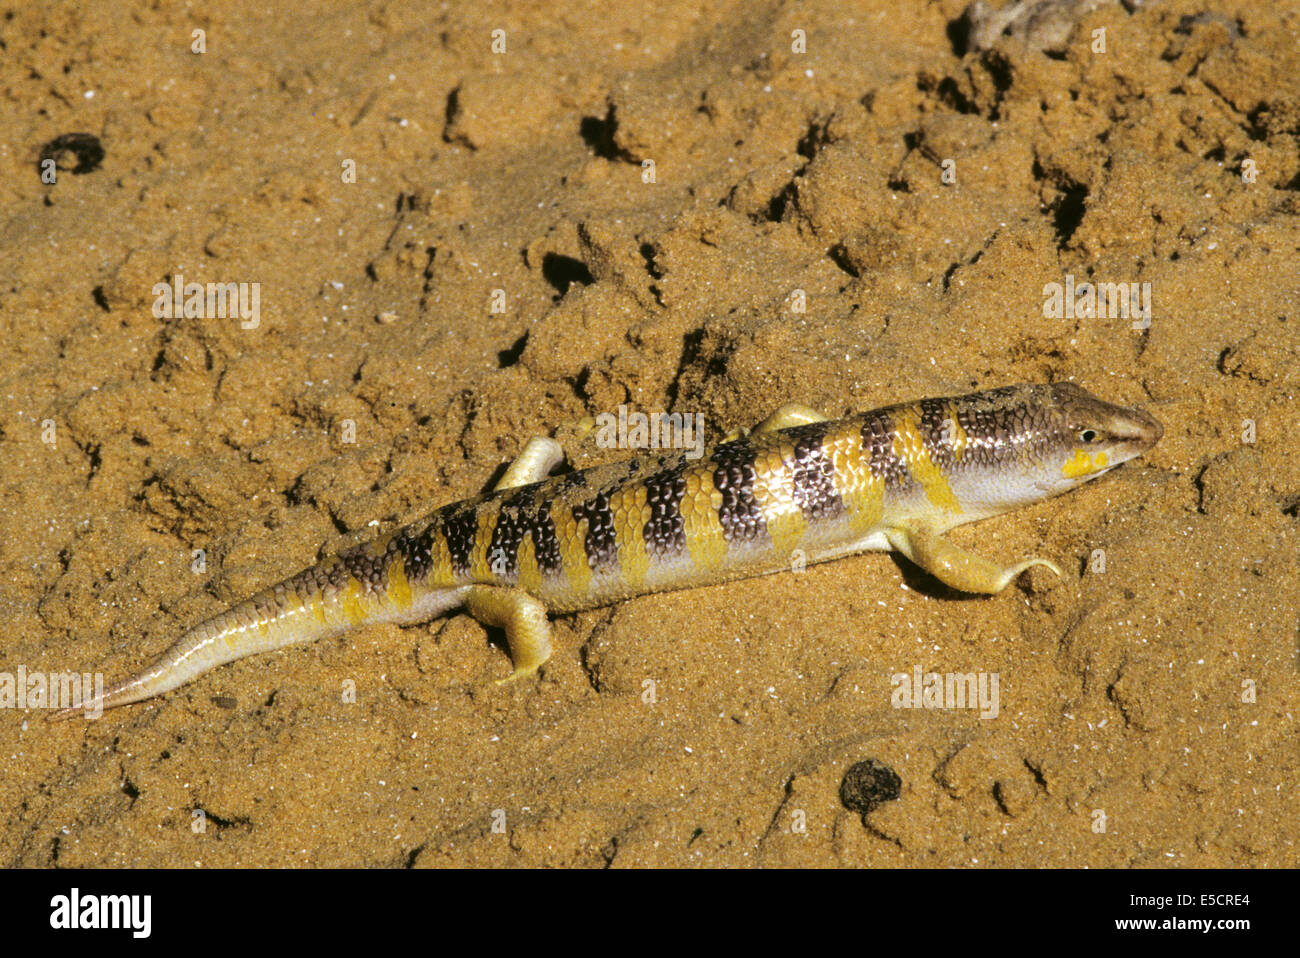 Sandfish (Scincus scincus) is a species of skink that burrows into the sand and swims through it. It is native to north Africa a Stock Photo